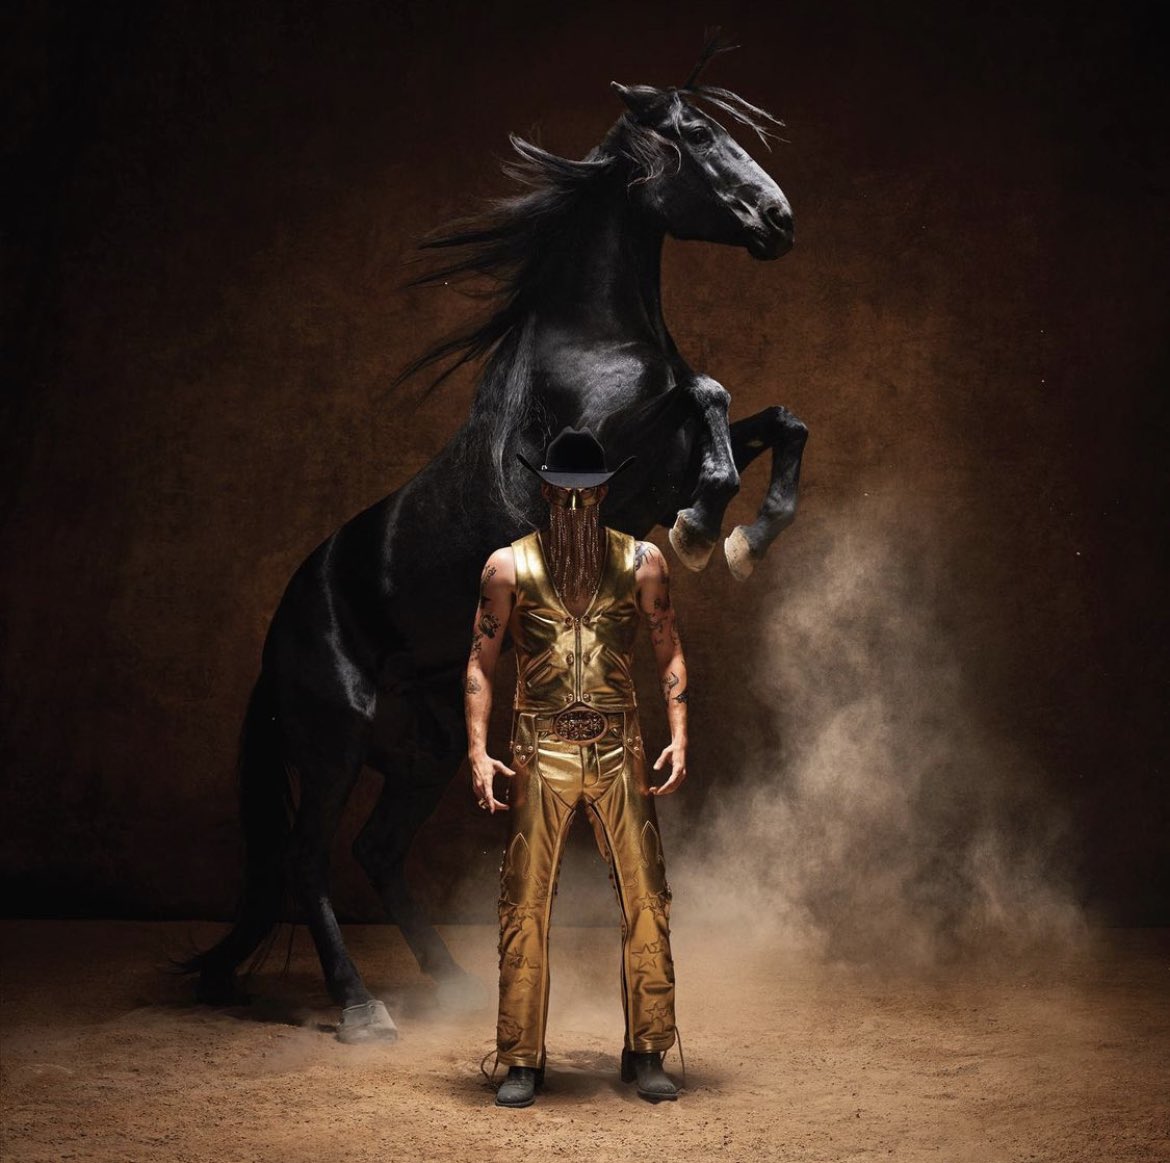 Orville Peck The Curse of the Blackened Eye cover artwork